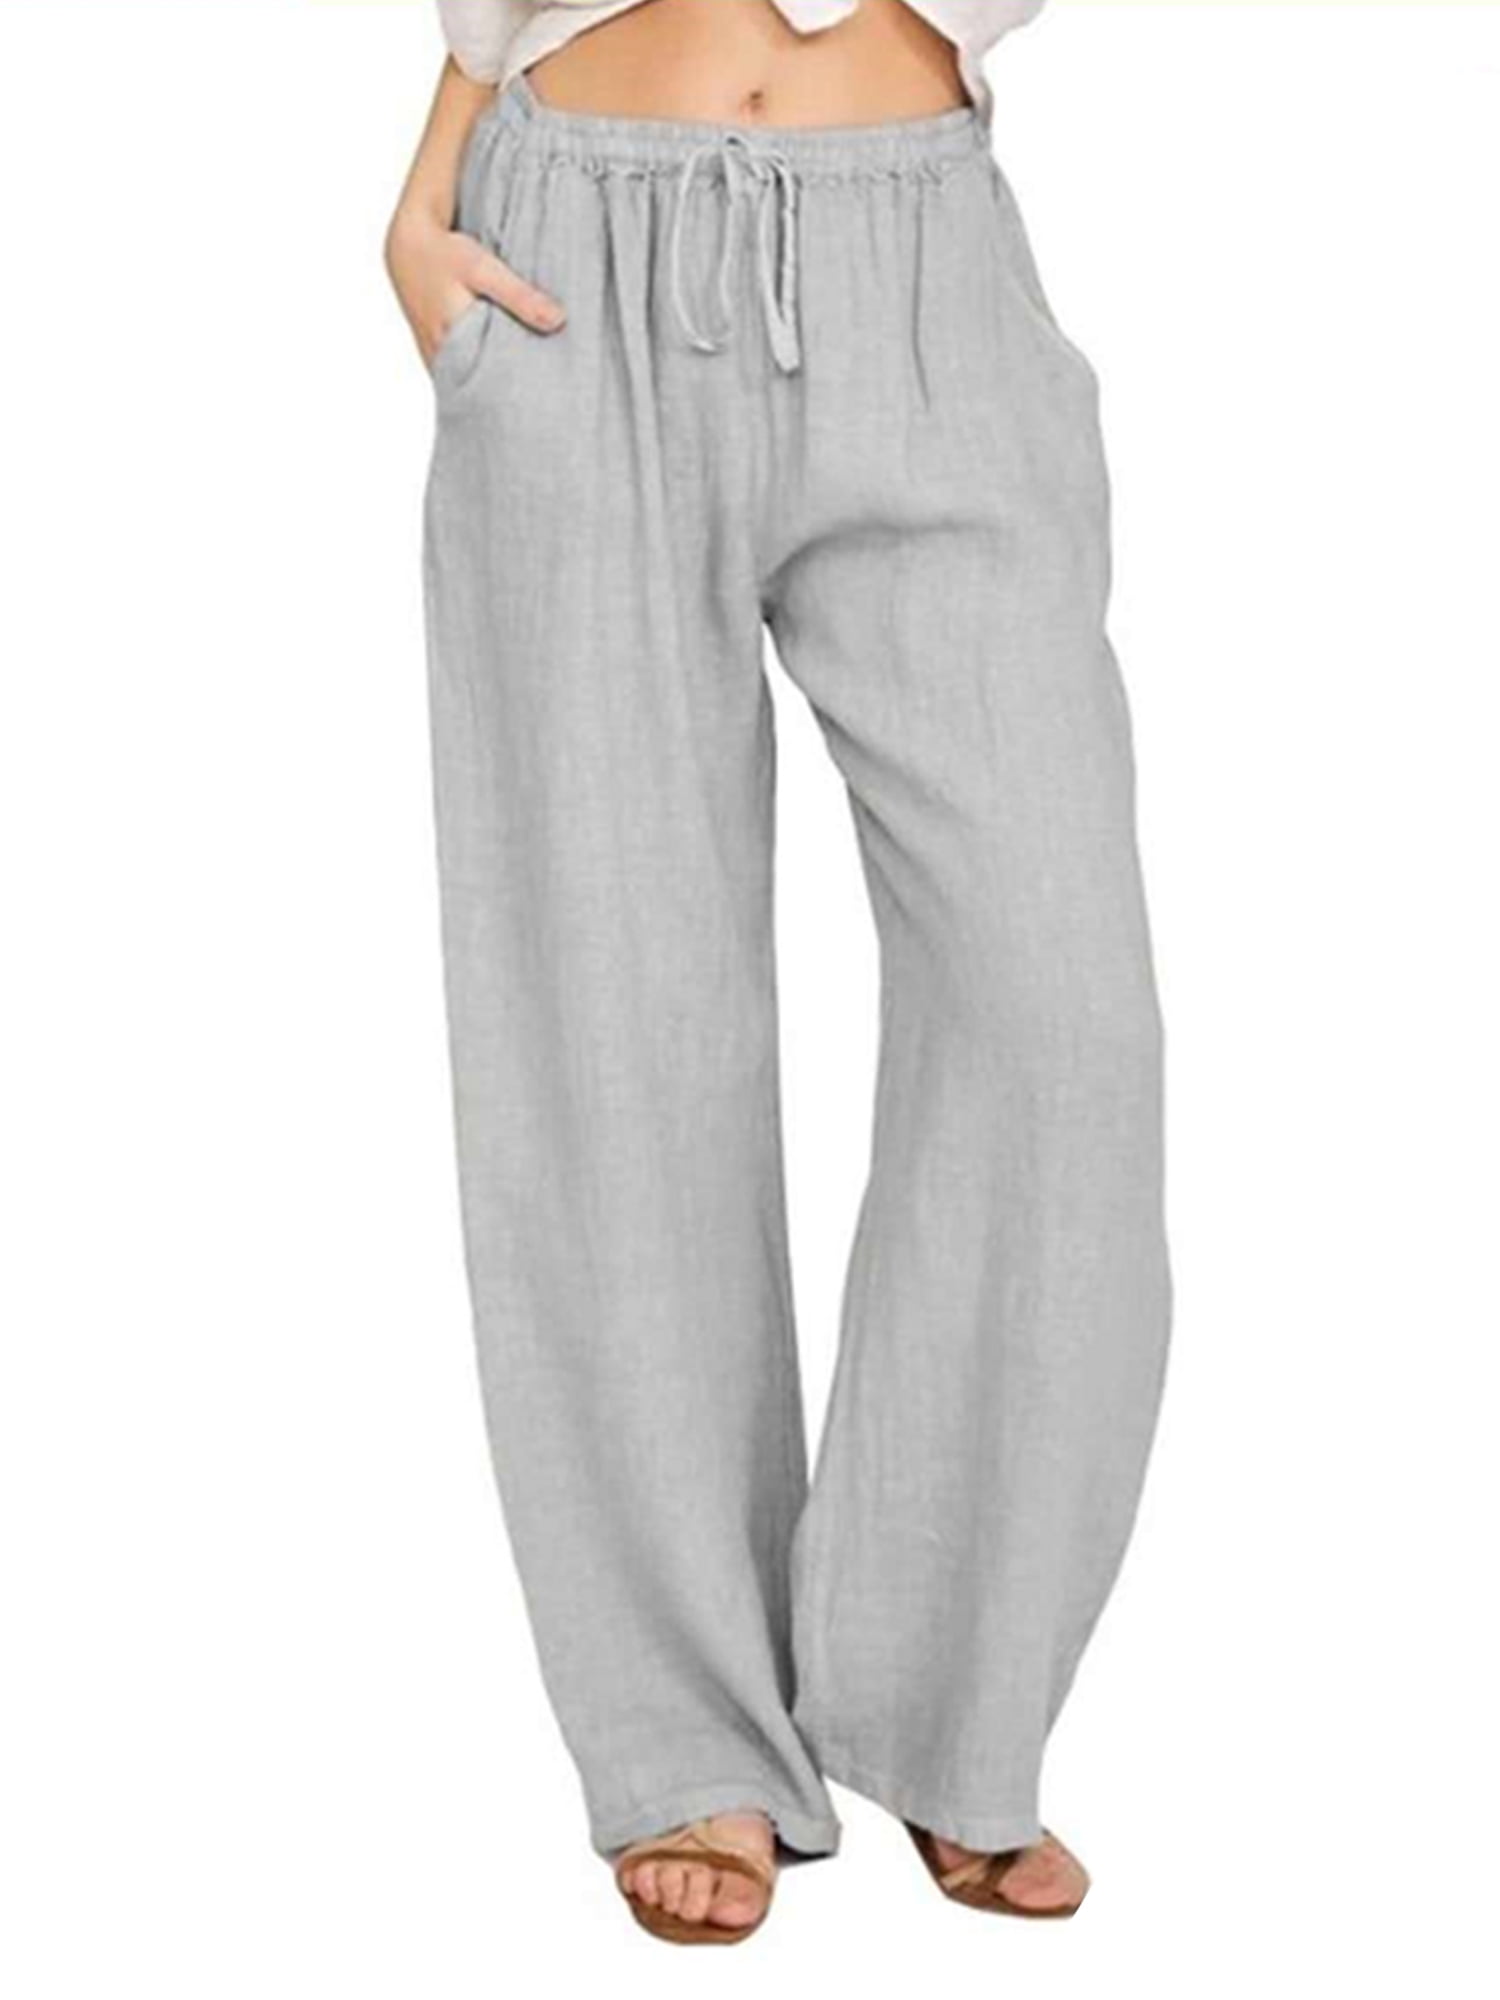 SZITOP Linen Pants for Women,Summer Smocked Waist Wide Leg Pants Casual Loose High Waisted Pants Lounge Trousers with Pockets 